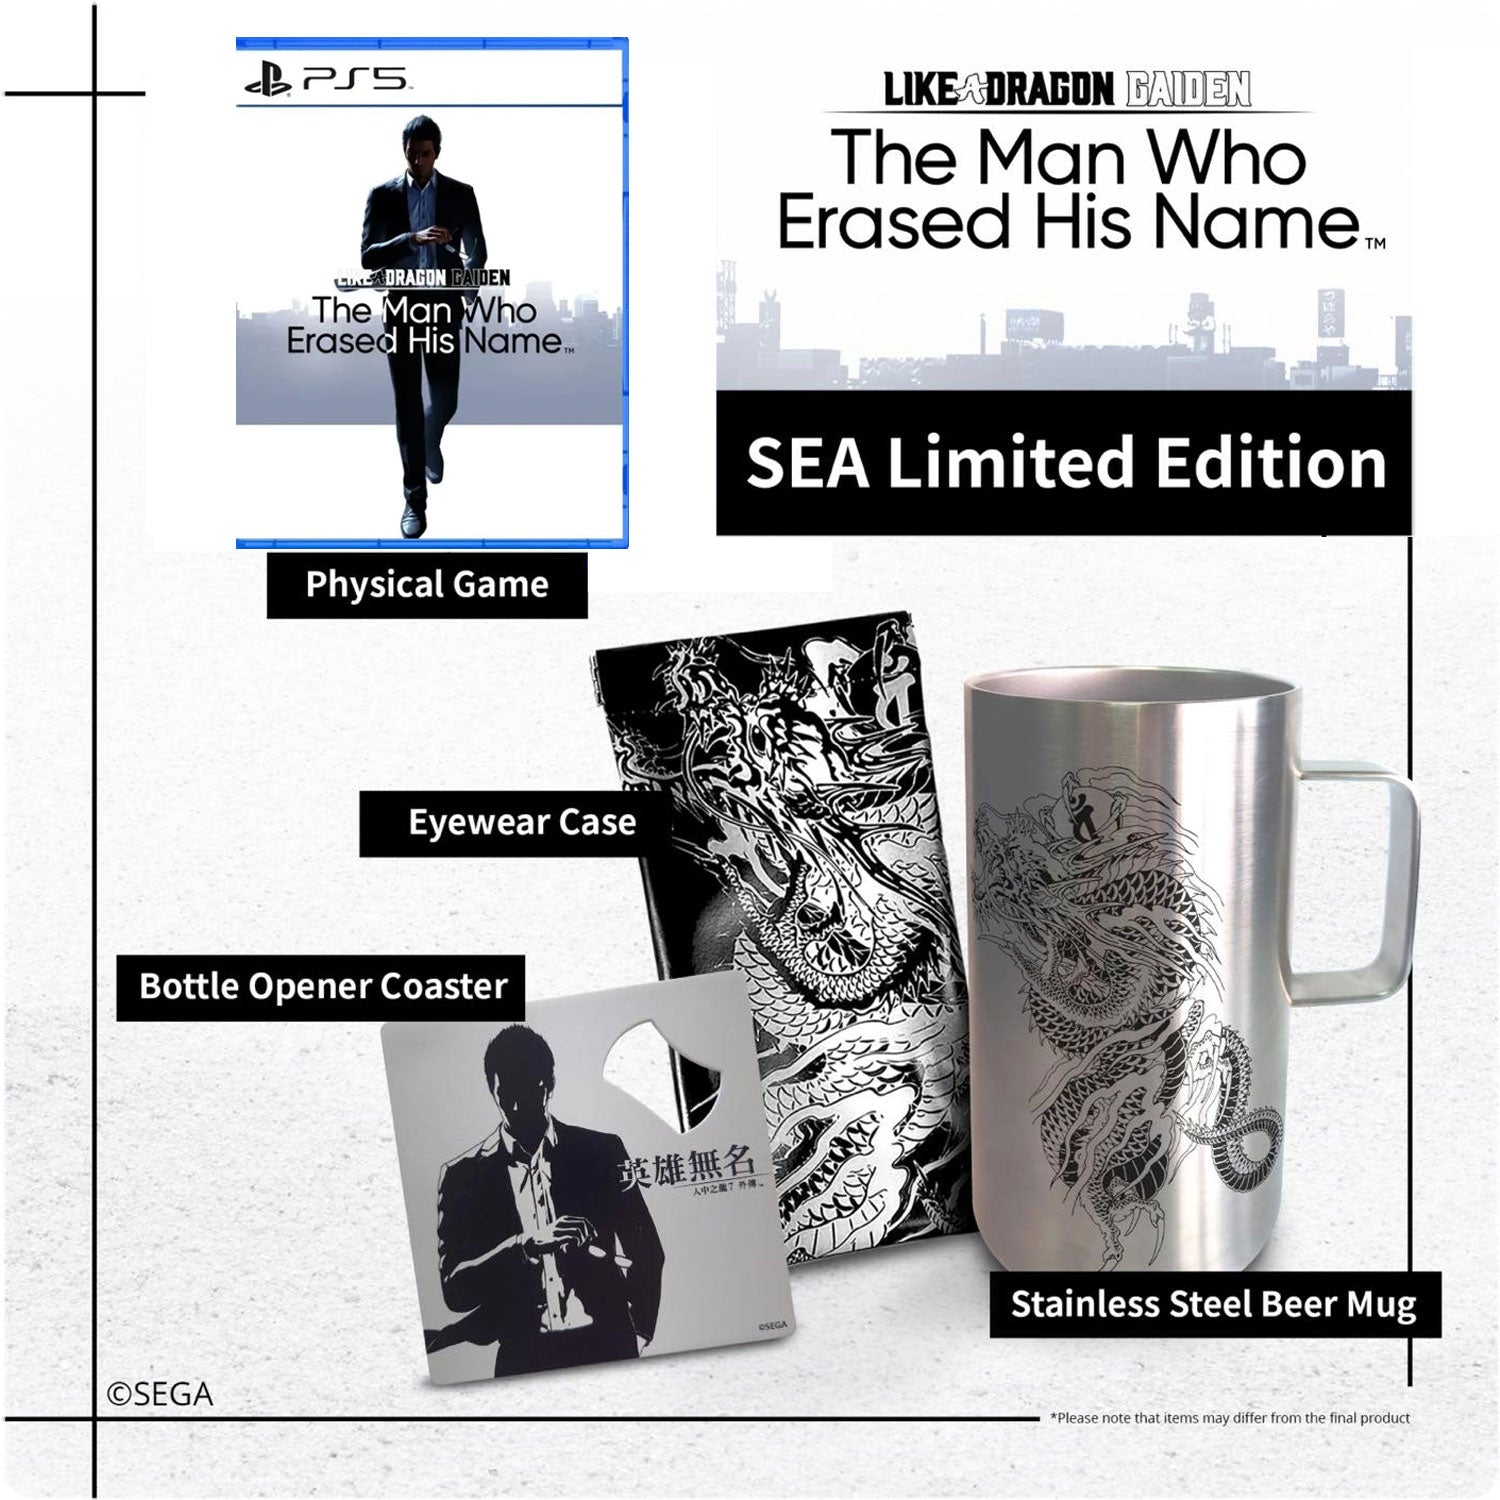 PS5 Like a Dragon Gaiden: The Man Who Erased His Name SEA Limited Edition